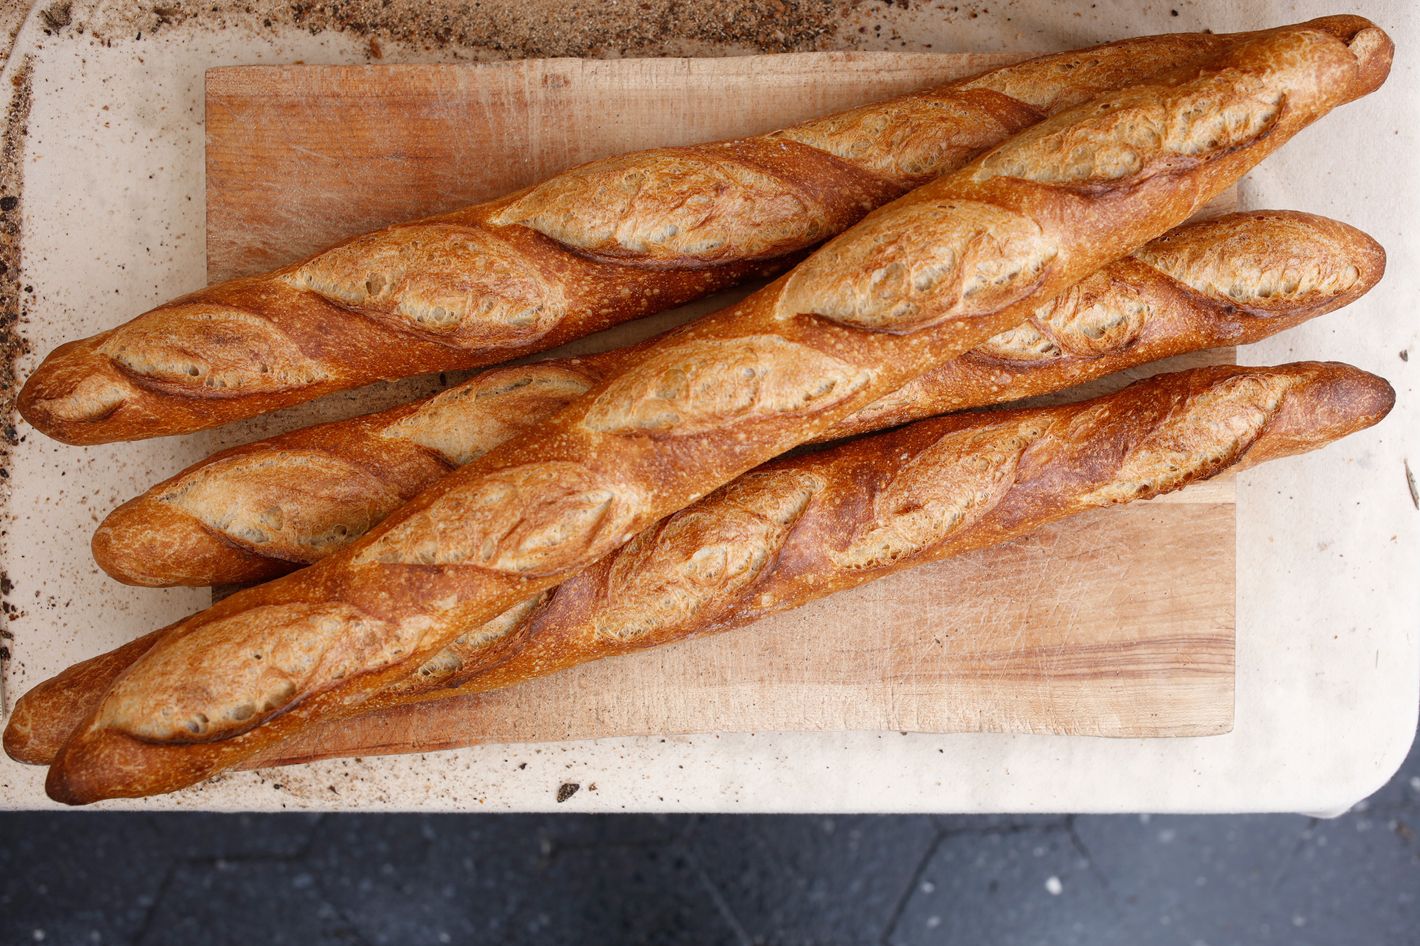 The Best Baguette Recipe Is the One You Make Yourself - The New York Times